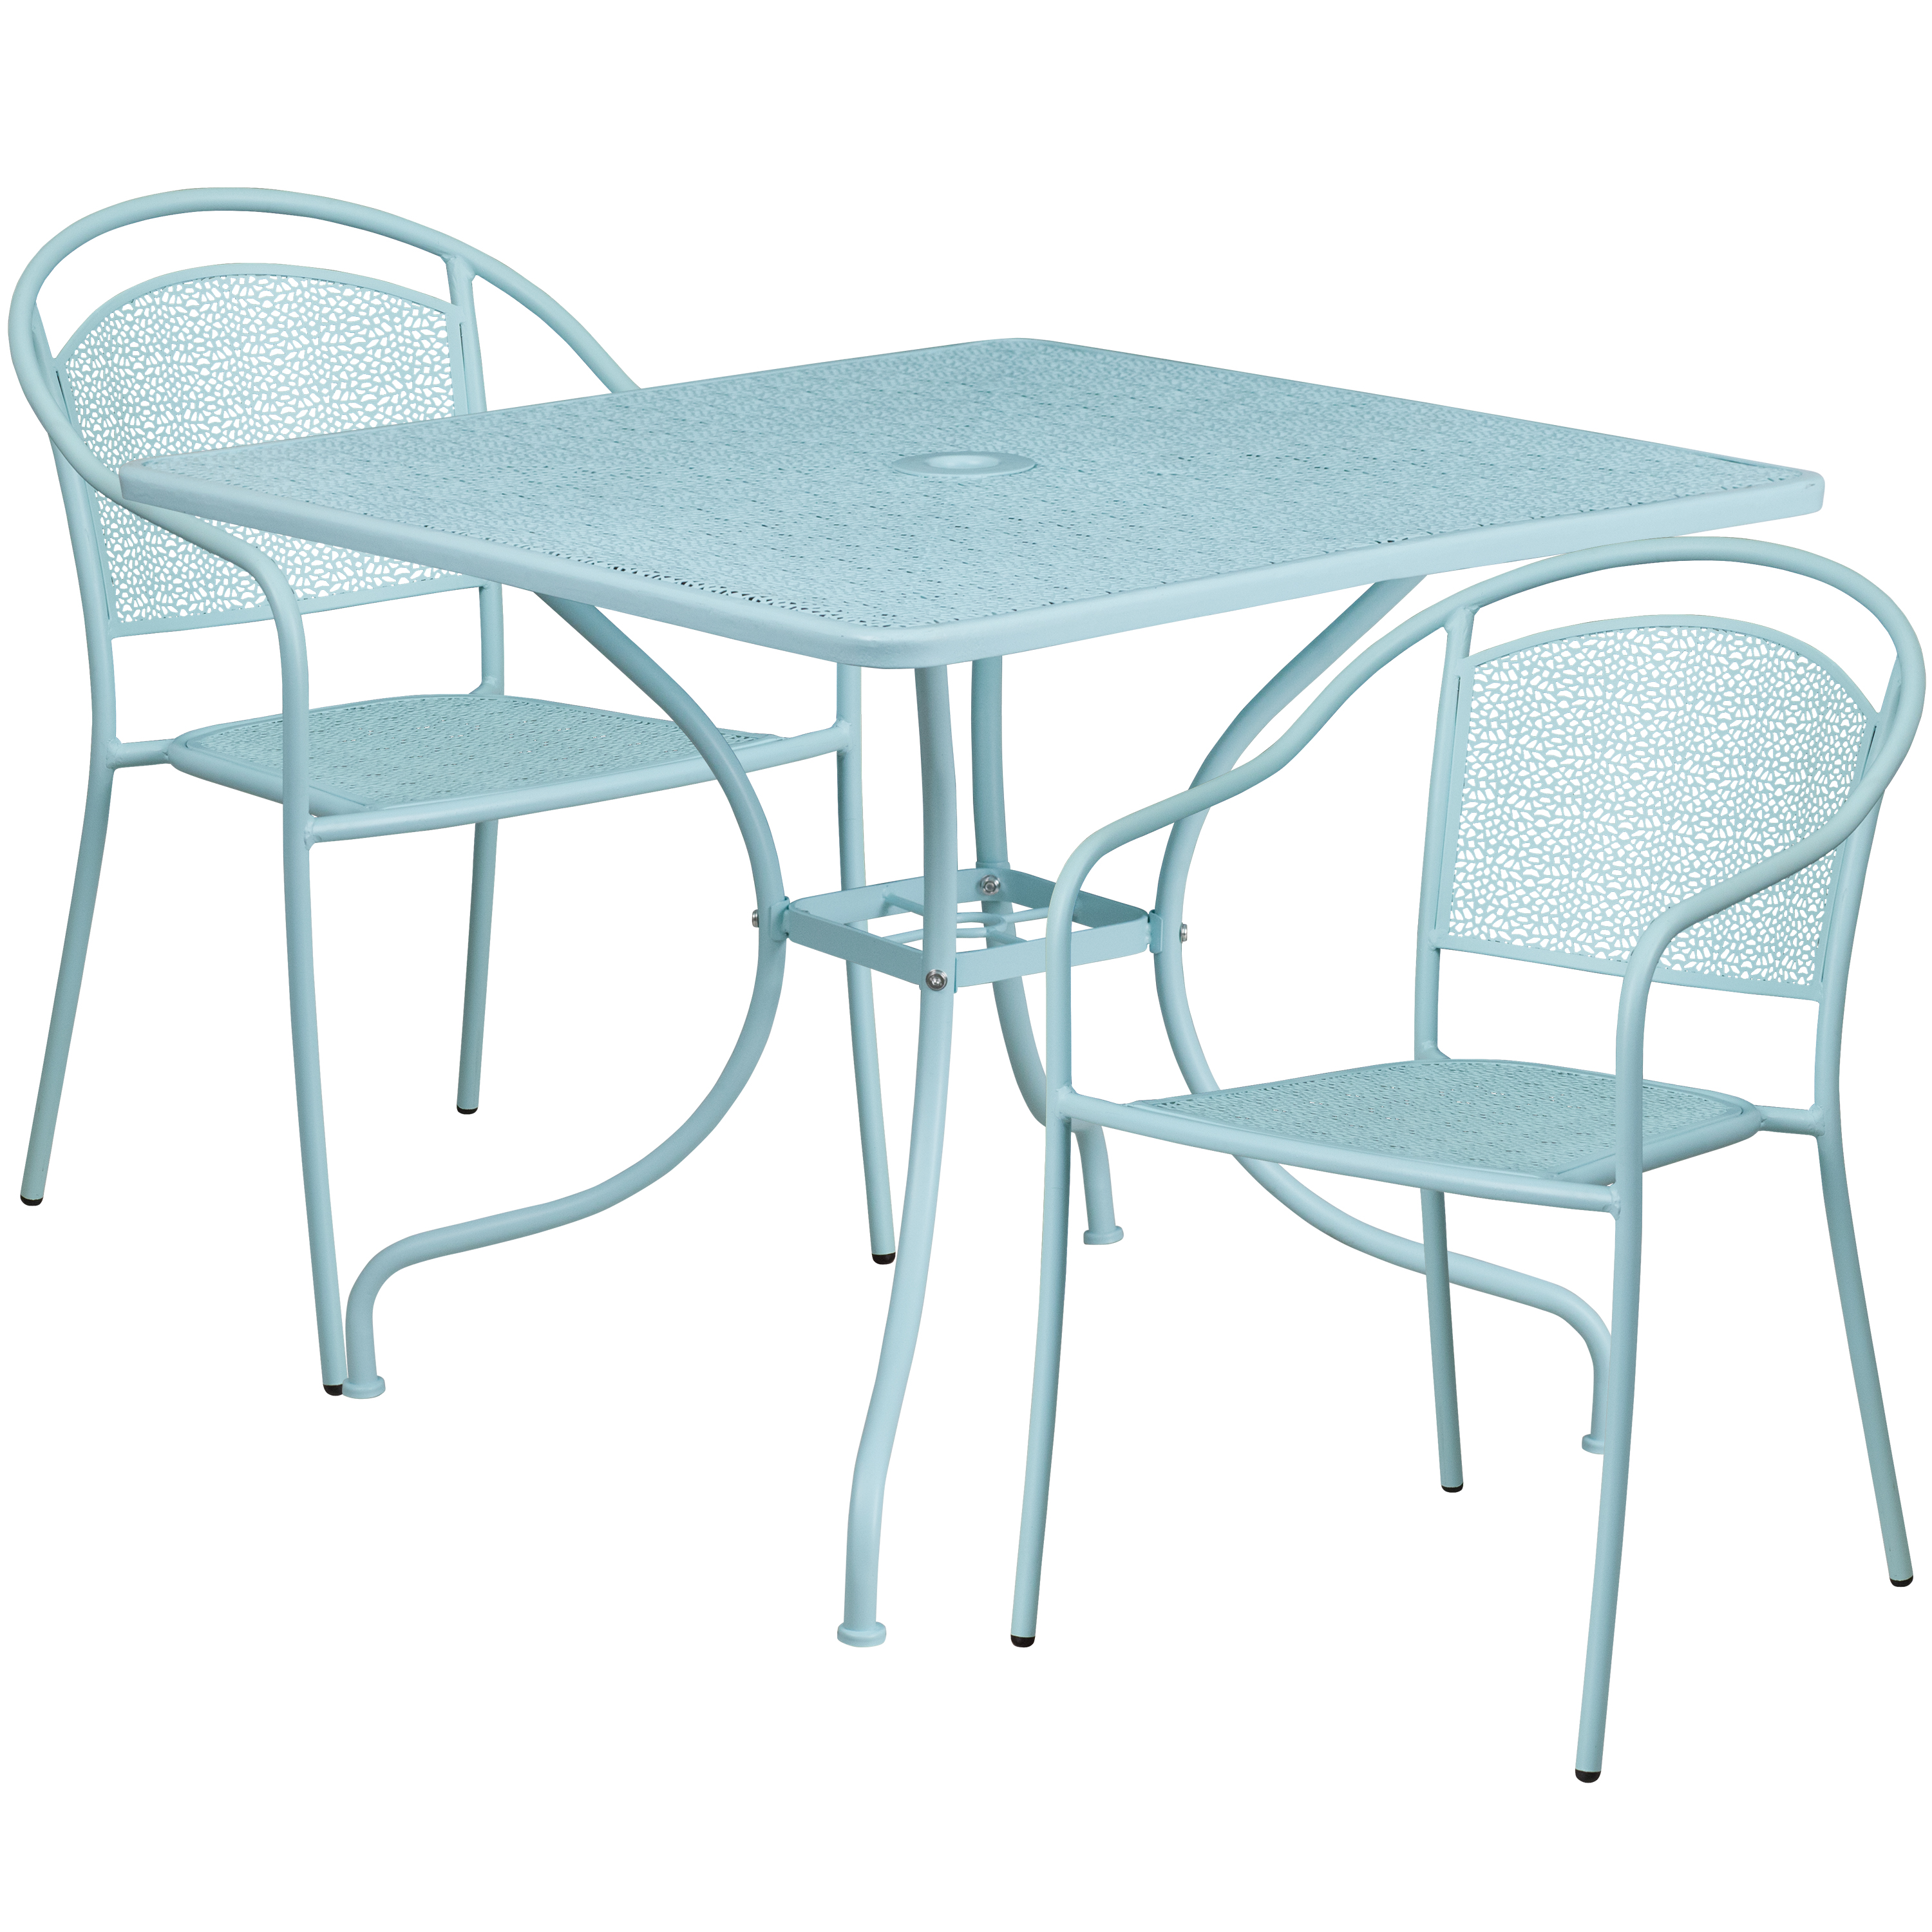 Flash Furniture CO-35SQ-03CHR2-SKY-GG 35.5" Square Sky Blue Indoor/Outdoor Steel Patio Table Set with 2 Round Back Chairs